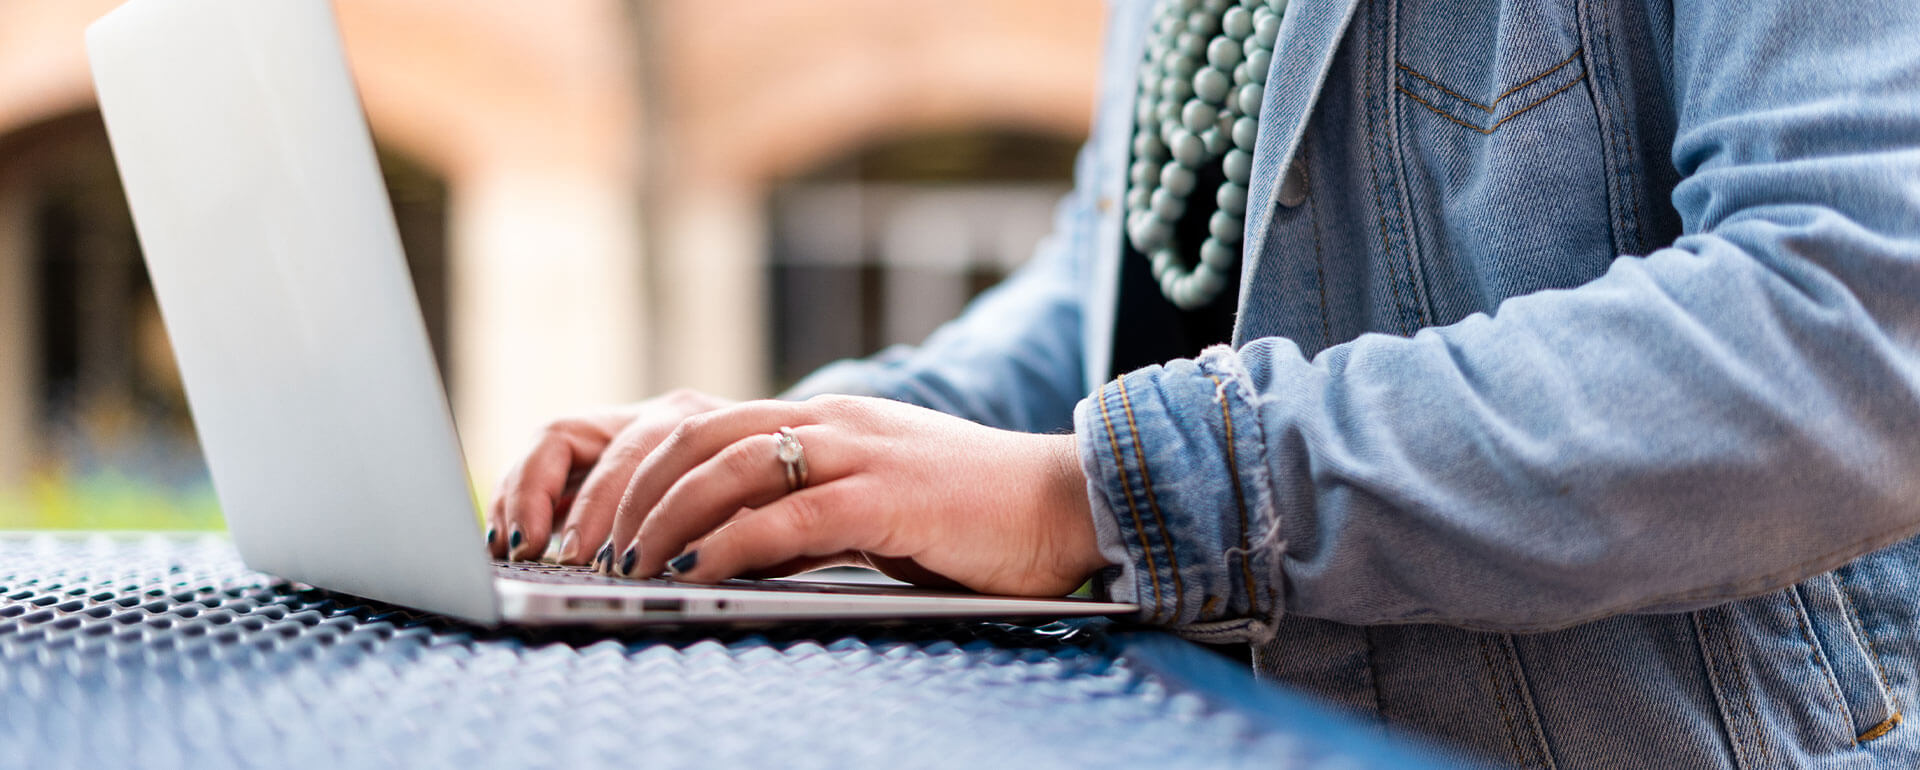 A female student types on a laptop.